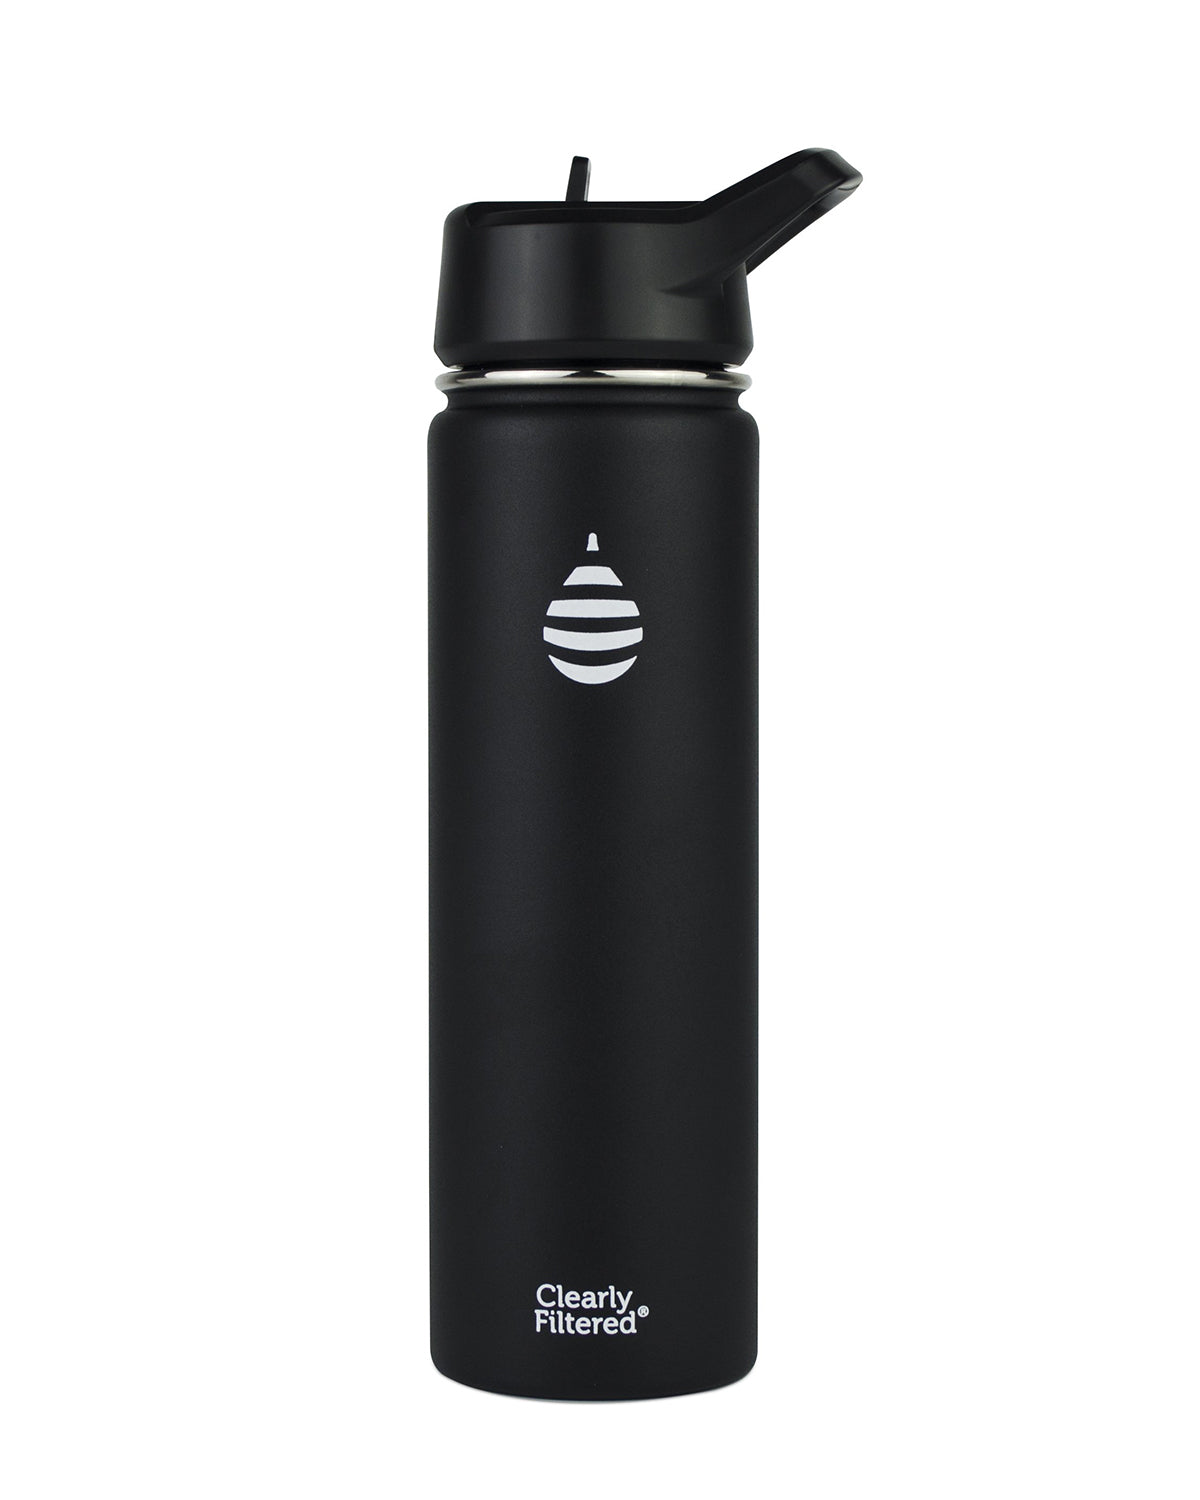 Where to Buy Clearly Filtered Water Bottle